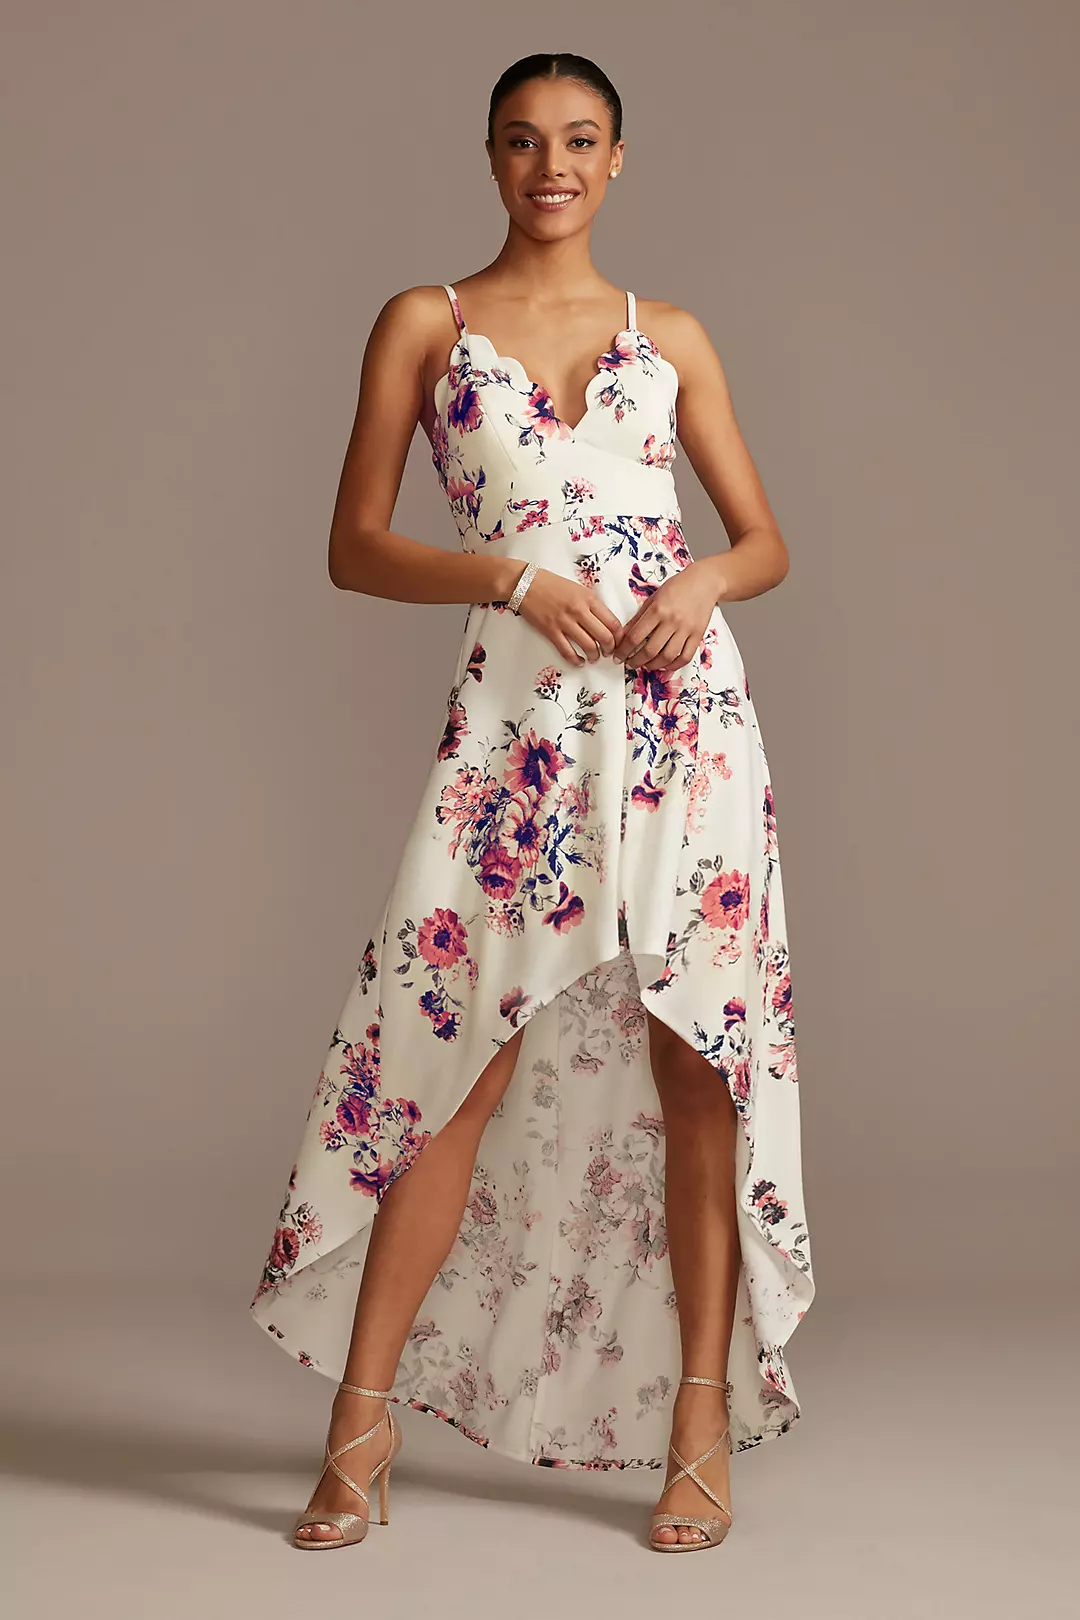 Scalloped Spaghetti Strap High Low Floral Dress Image